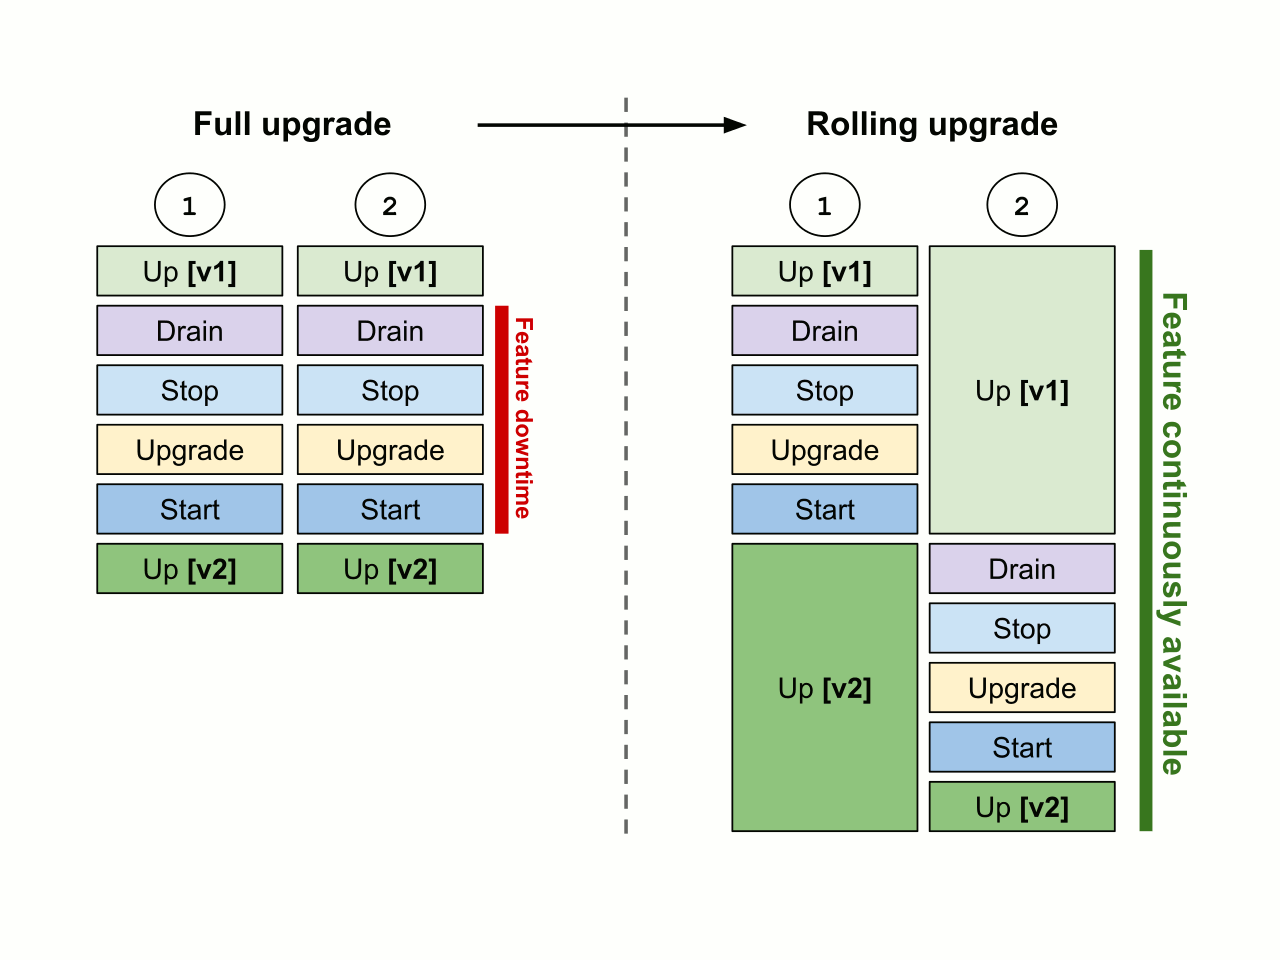 The effects of rolling upgrade on feature availability